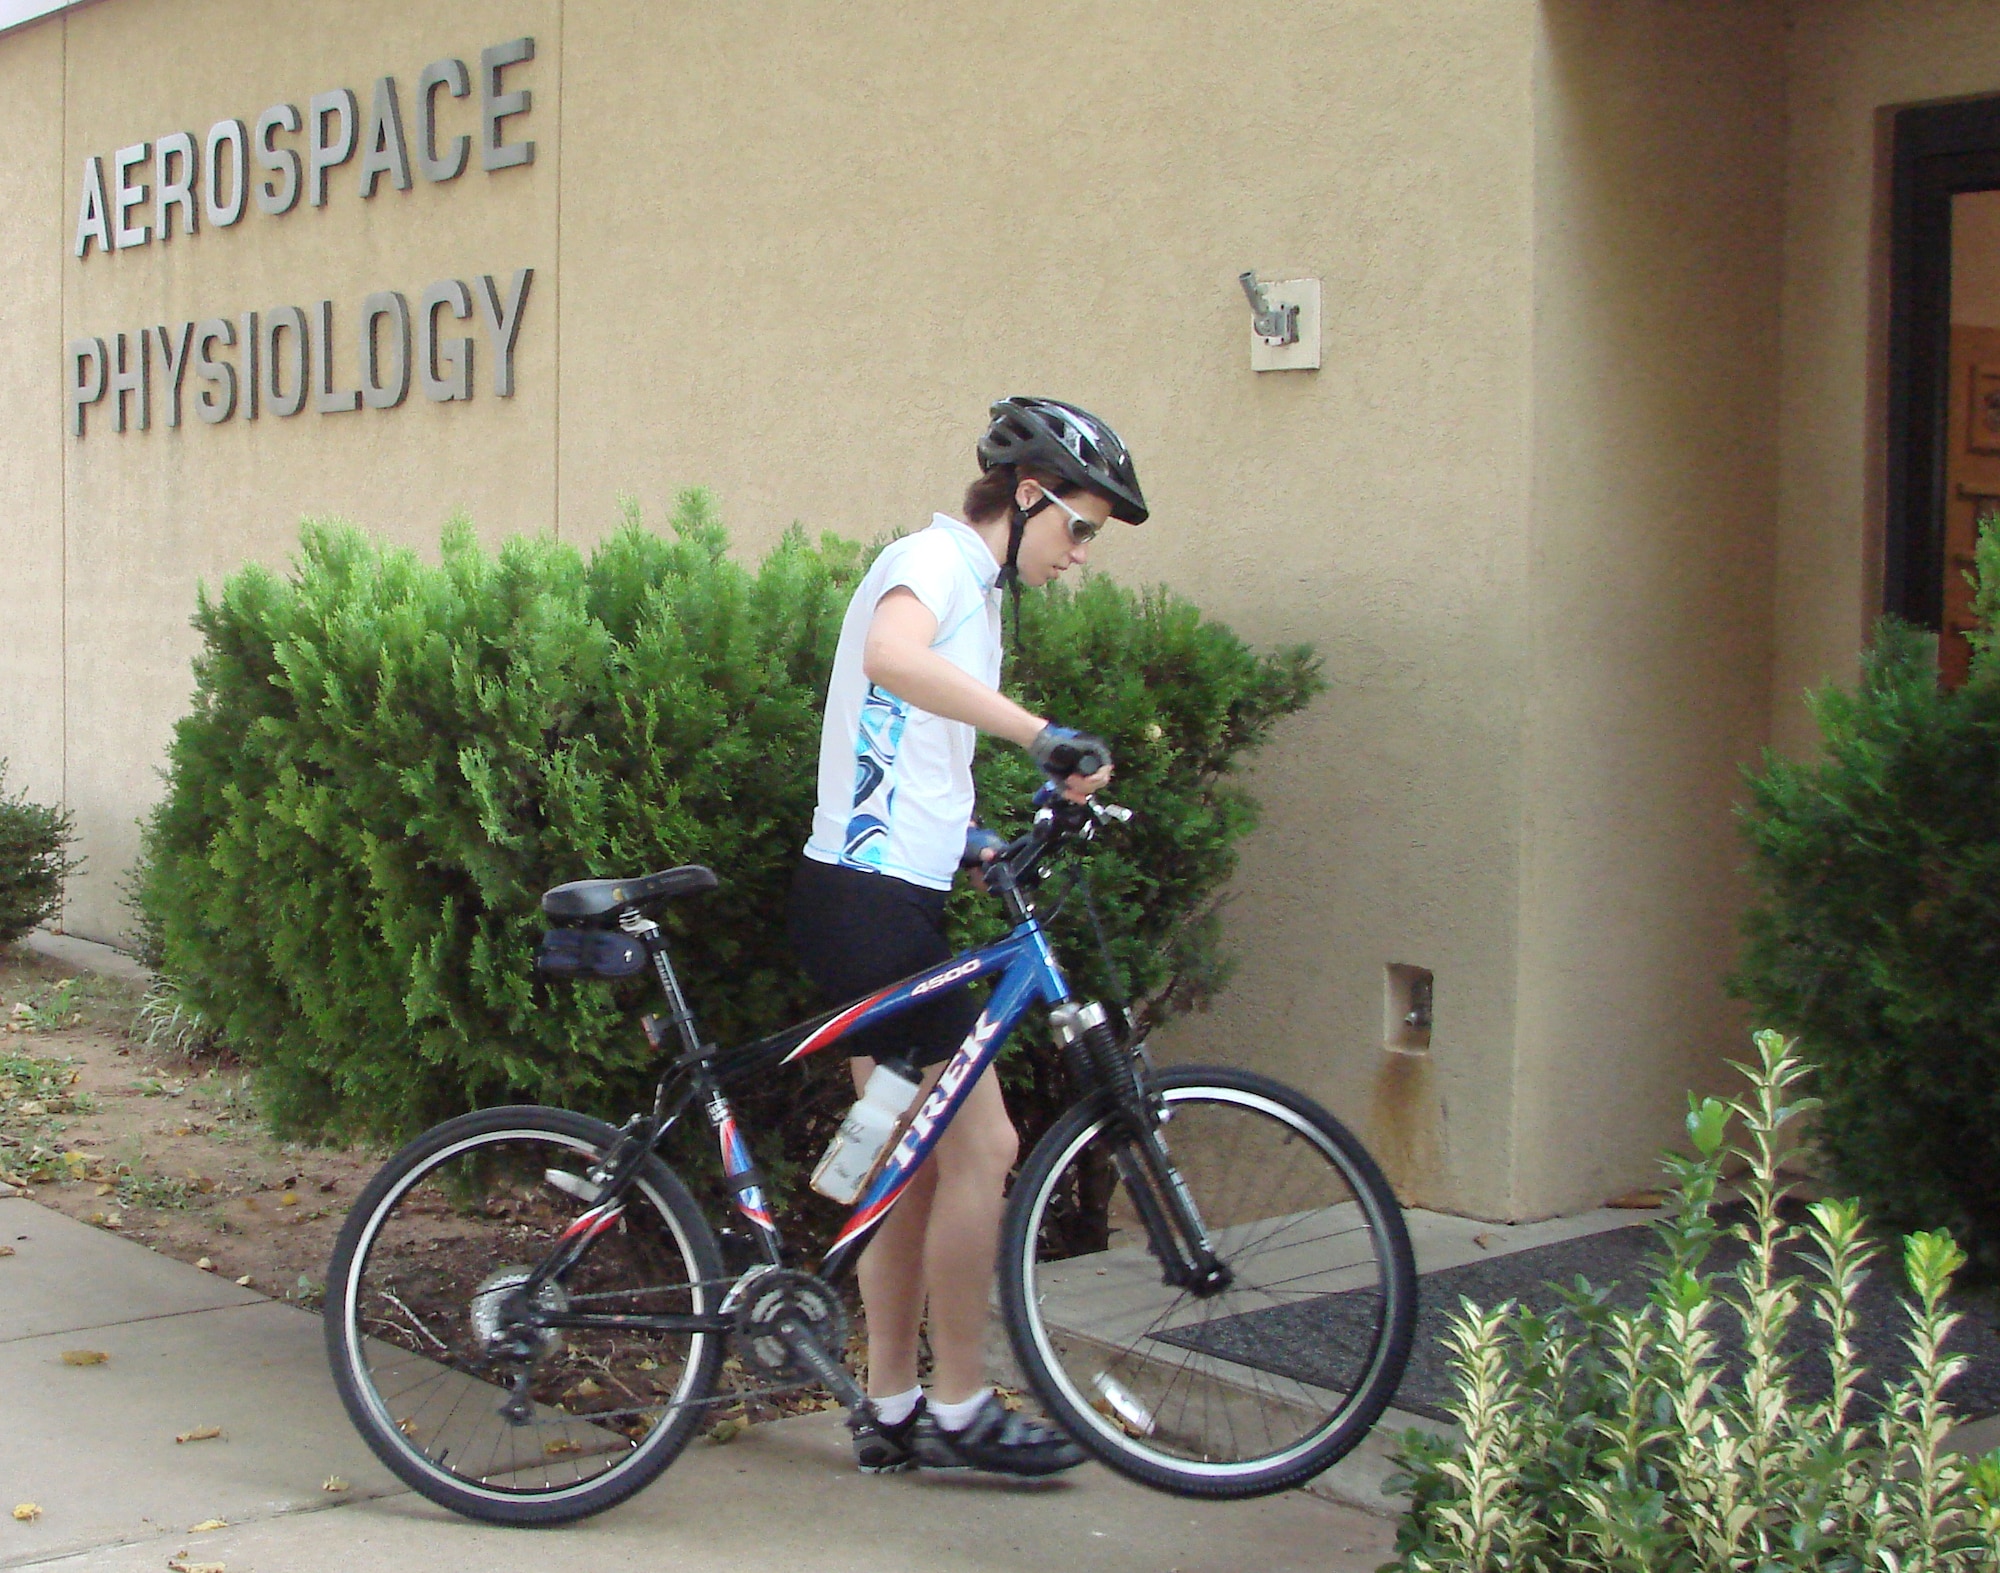 Capt. Joy Schaubhut, 71st Medical Operations Support Squadron aerospace physiologist, arrives for work Monday for the start of a month-long program of bike only transportation. (US Air Force photo/Frank McIntyre)
                              